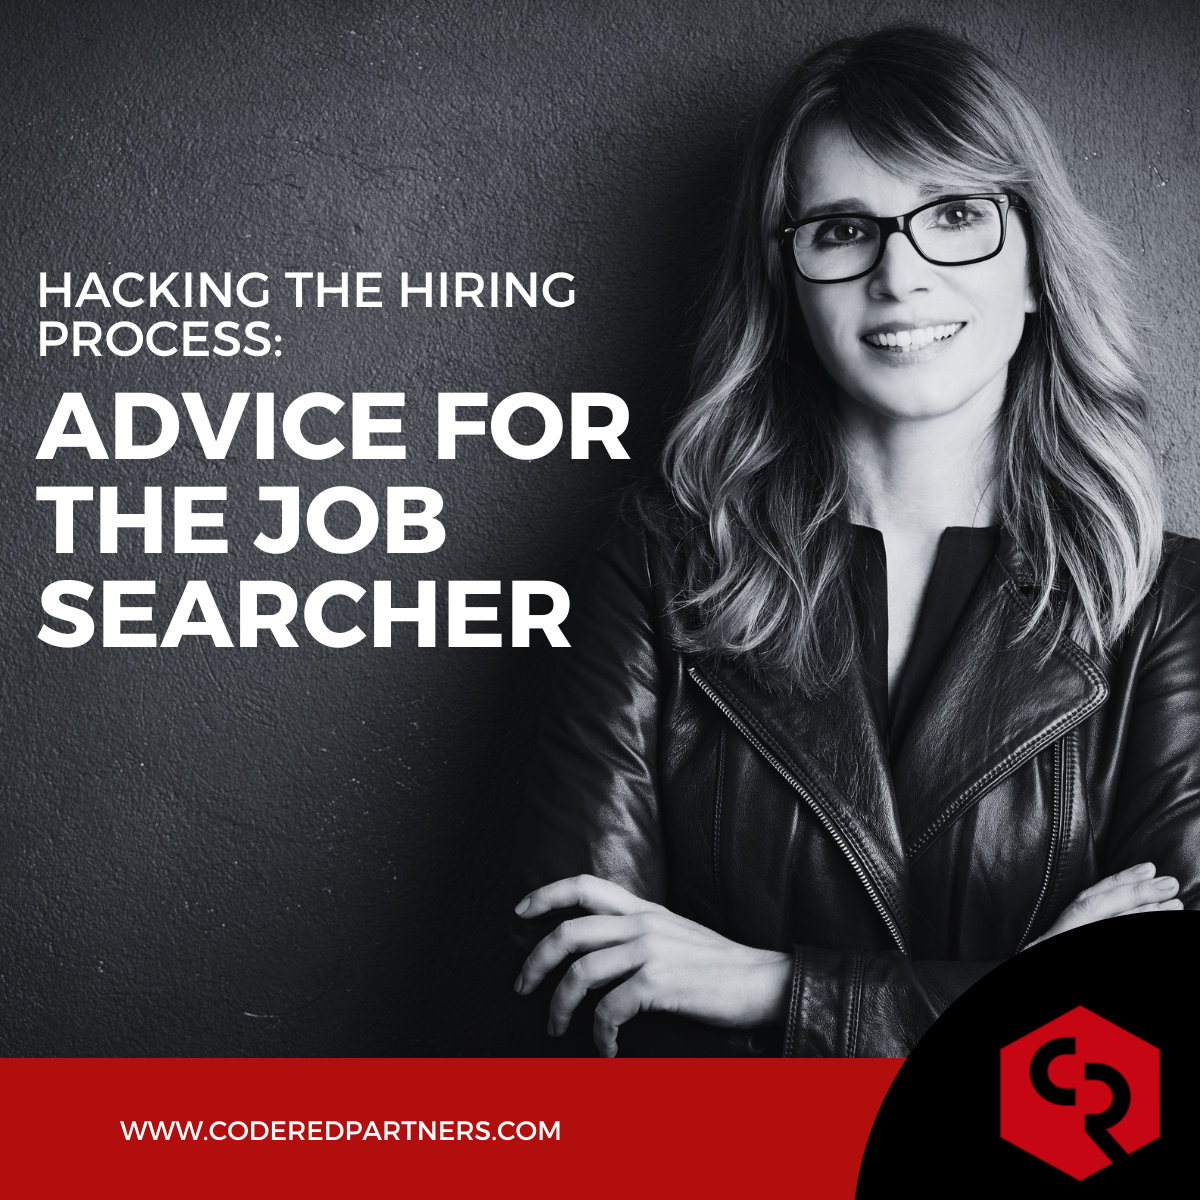 advice for the job searcher